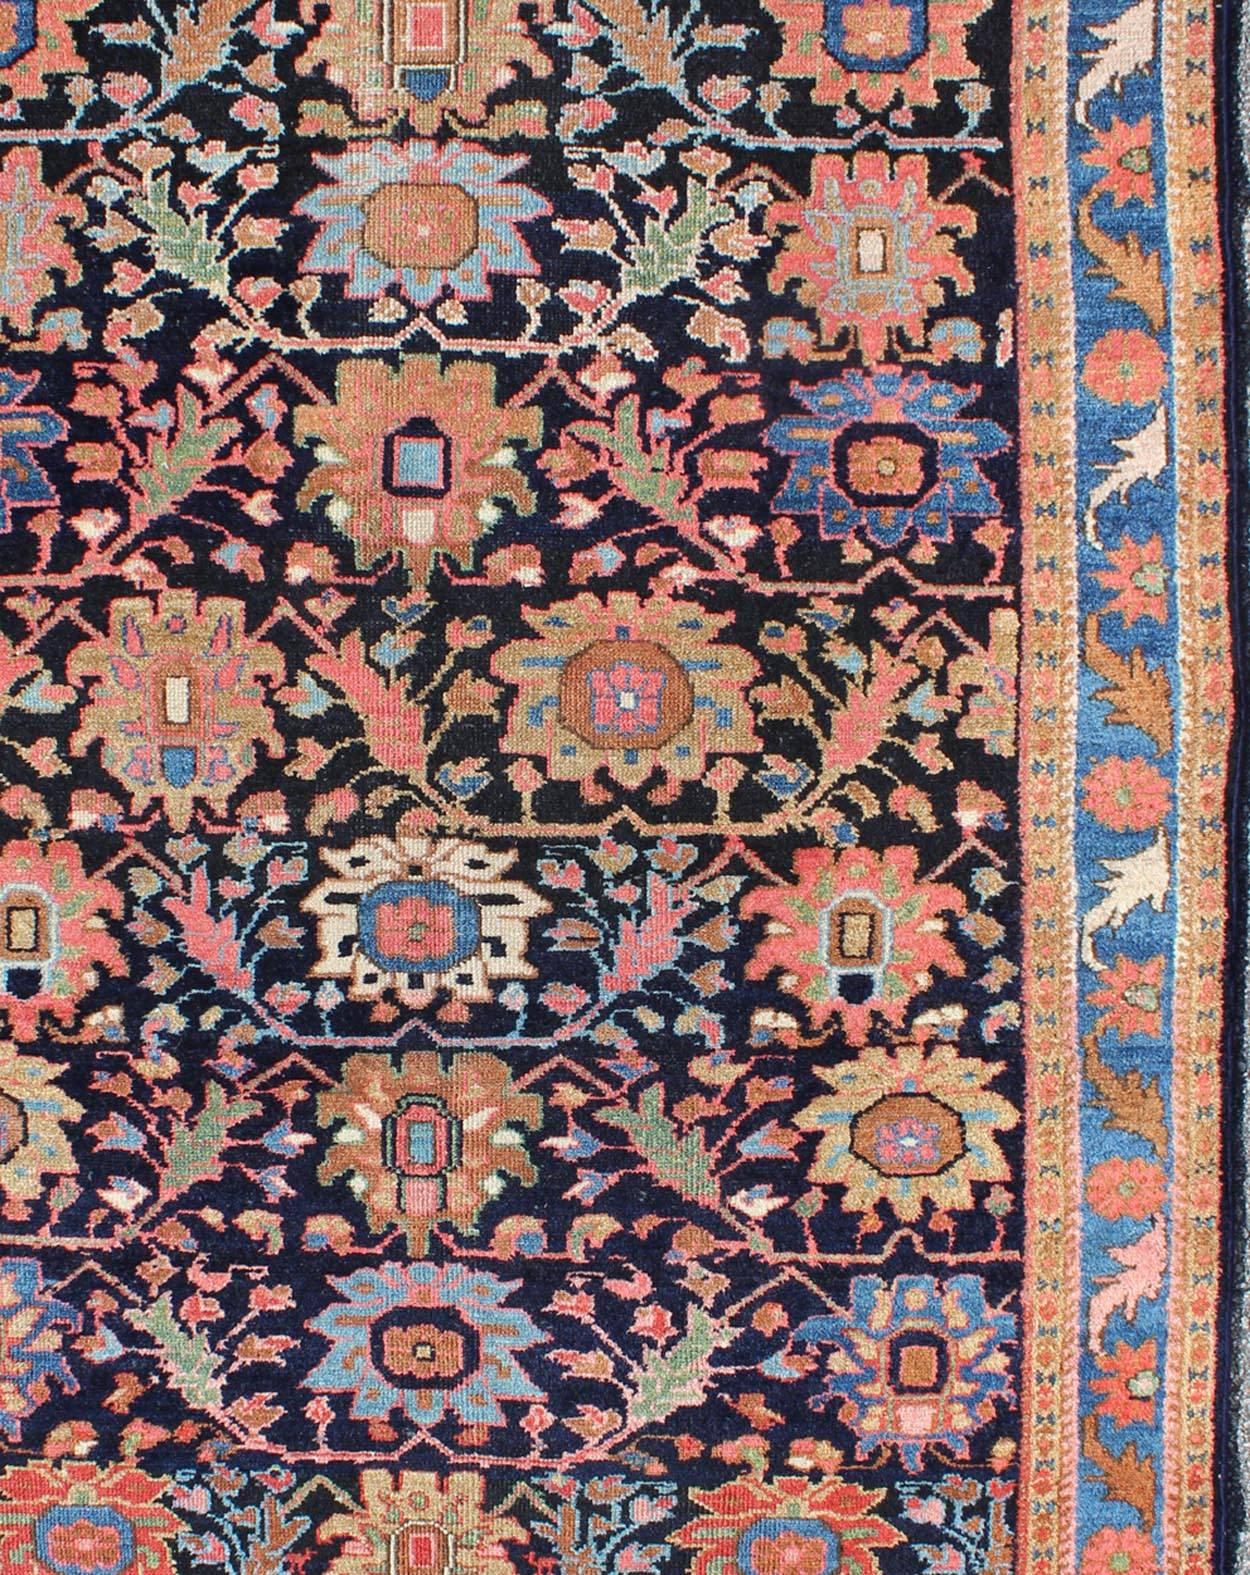 Antique Persian Malayer Rug with Large Floral Motifs in Navy and Multi Colors In Excellent Condition For Sale In Atlanta, GA